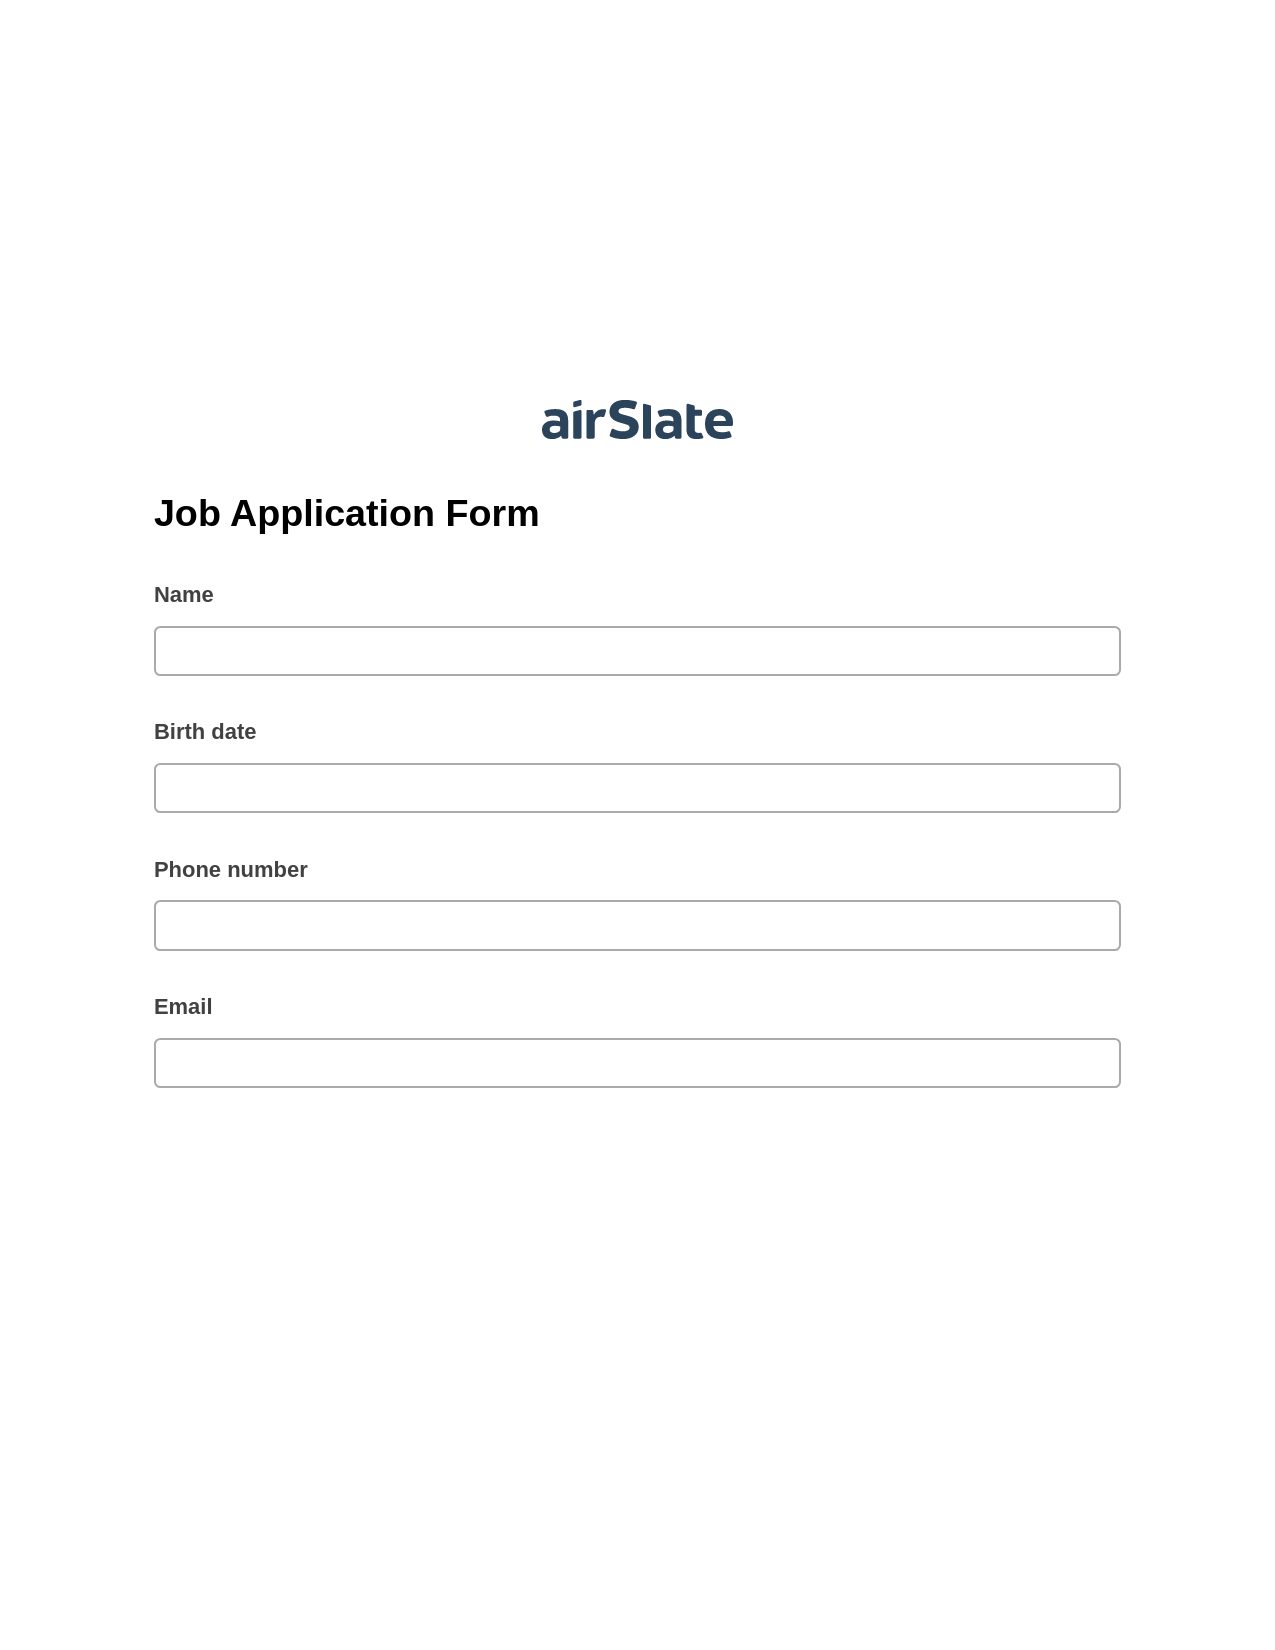 Multirole Job Application Form Pre-fill from CSV File Dropdown Options Bot, Create Slate from another Flow Bot, Export to Salesforce Bot